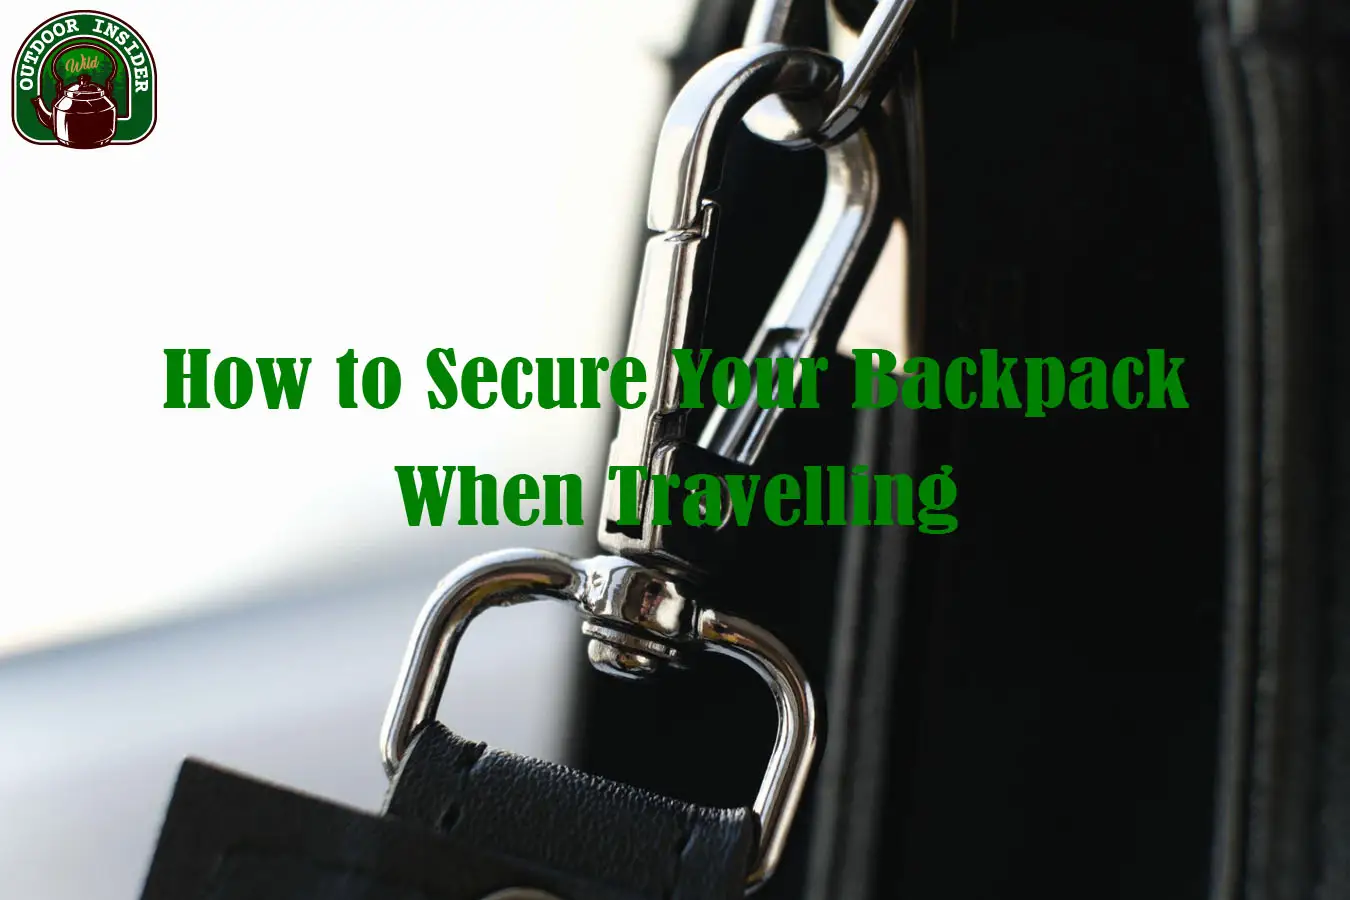 How to Secure Backpack When Travelling